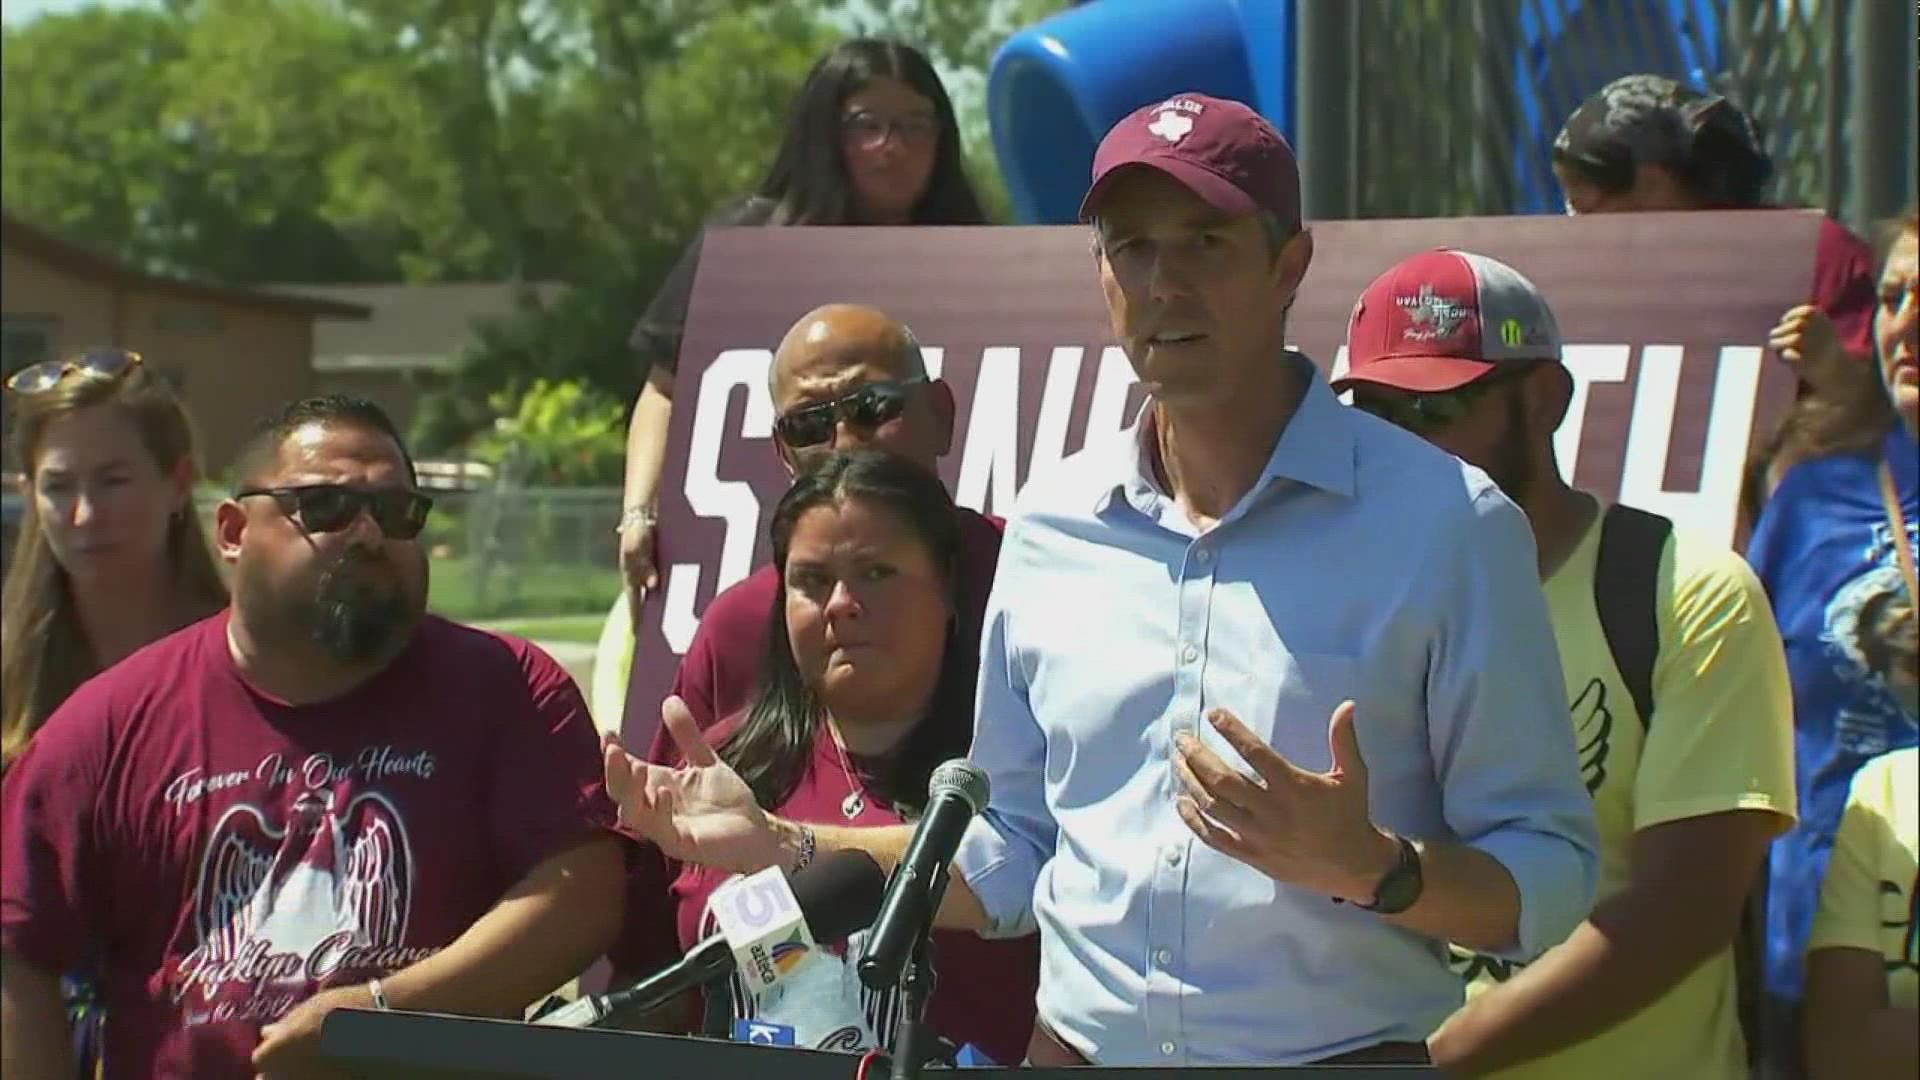 Many Uvalde families are backing Democrate Beto O'Rourke for Governor, saying they want gun reform.